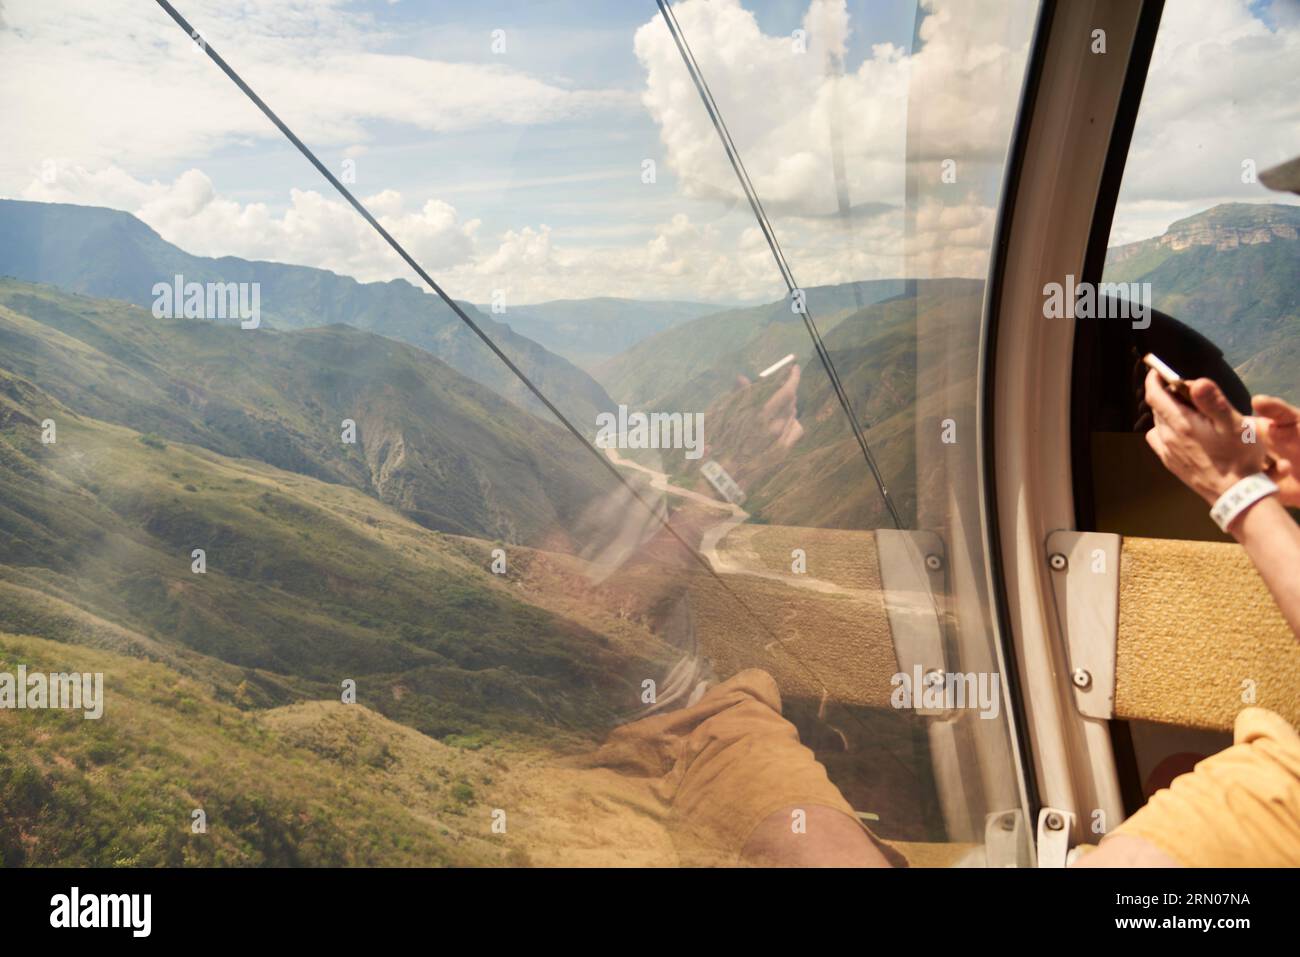 Unrecognizable person inside a cable car cabin in the Chicamocha Canyon, in Santander, Colombia. Stock Photo